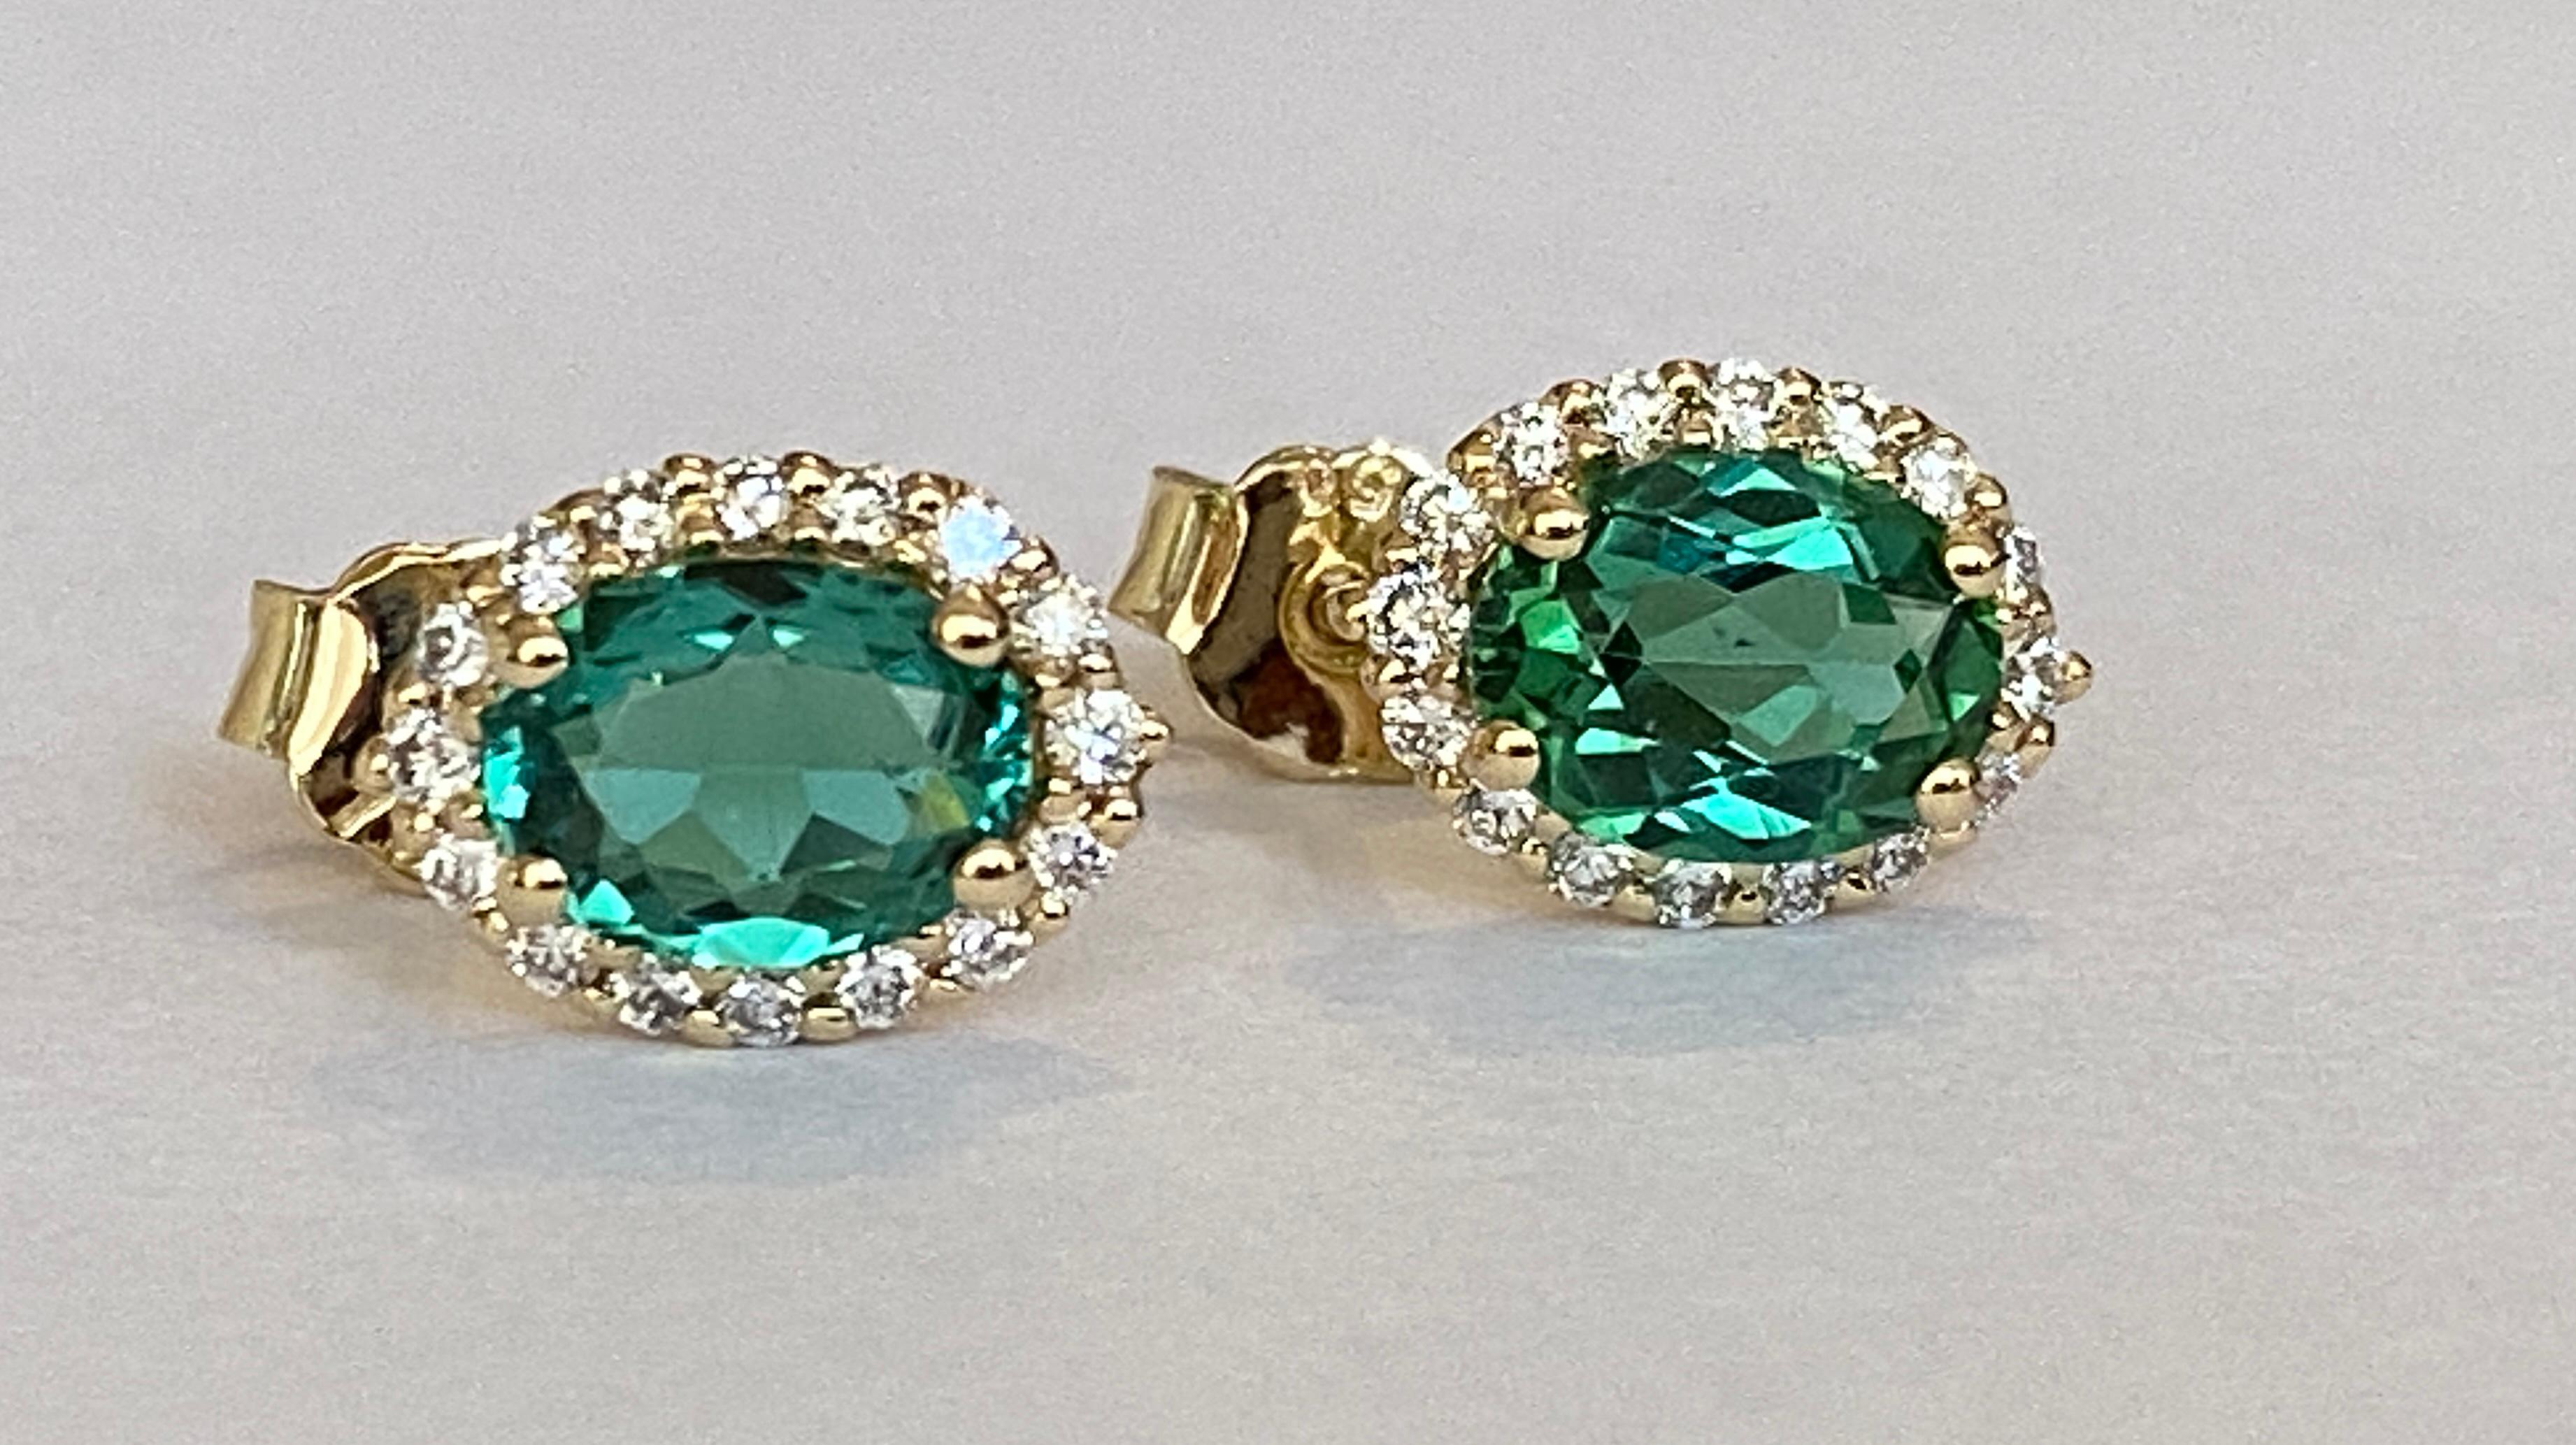 Offered in new condition, stud earrings in yellow gold, with two pieces of oval cut Green Tourmaline of approx. 2 carats together. The stones are surrounded by an entourage of 32 brilliant cut diamonds totaling approx. 0.40 ct of quality